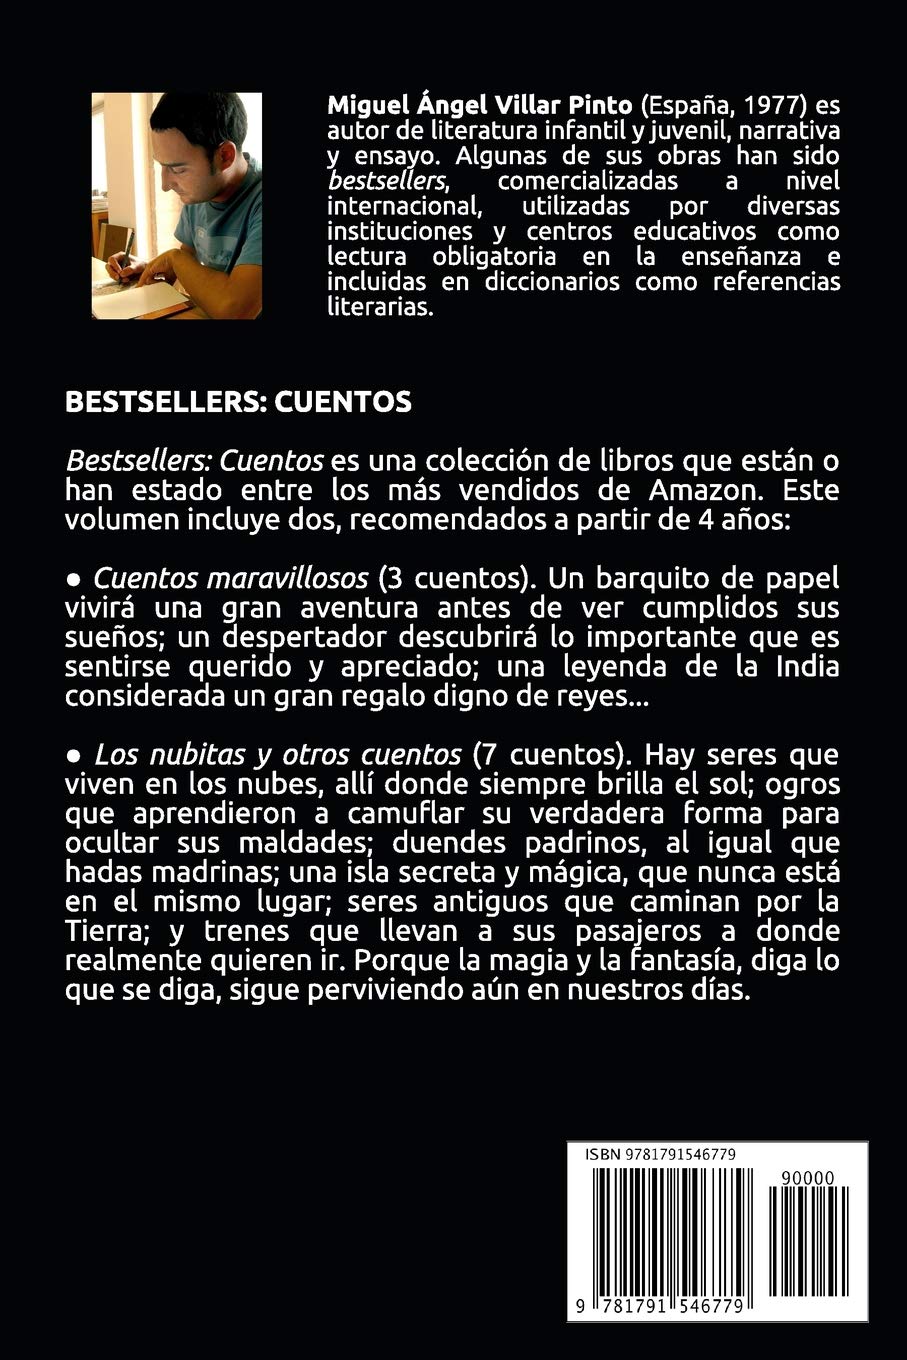 Bestsellers: Cuentos (Spanish Edition)